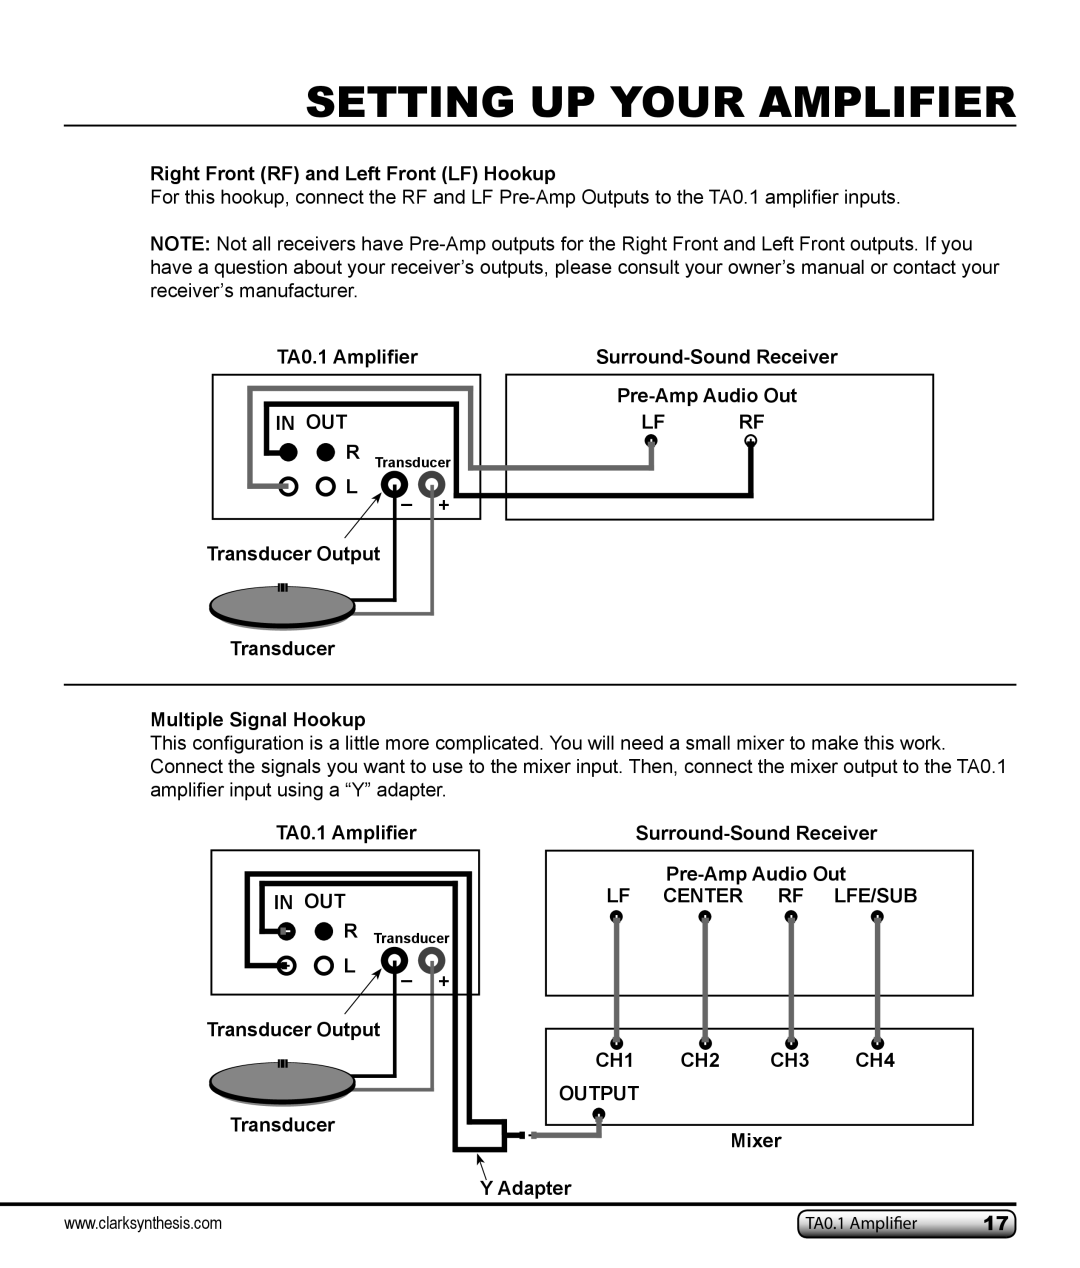 Clark Synthesis TA0.1 owner manual Setting Up Your Amplifier, Right Front RF and Left Front LF Hookup 